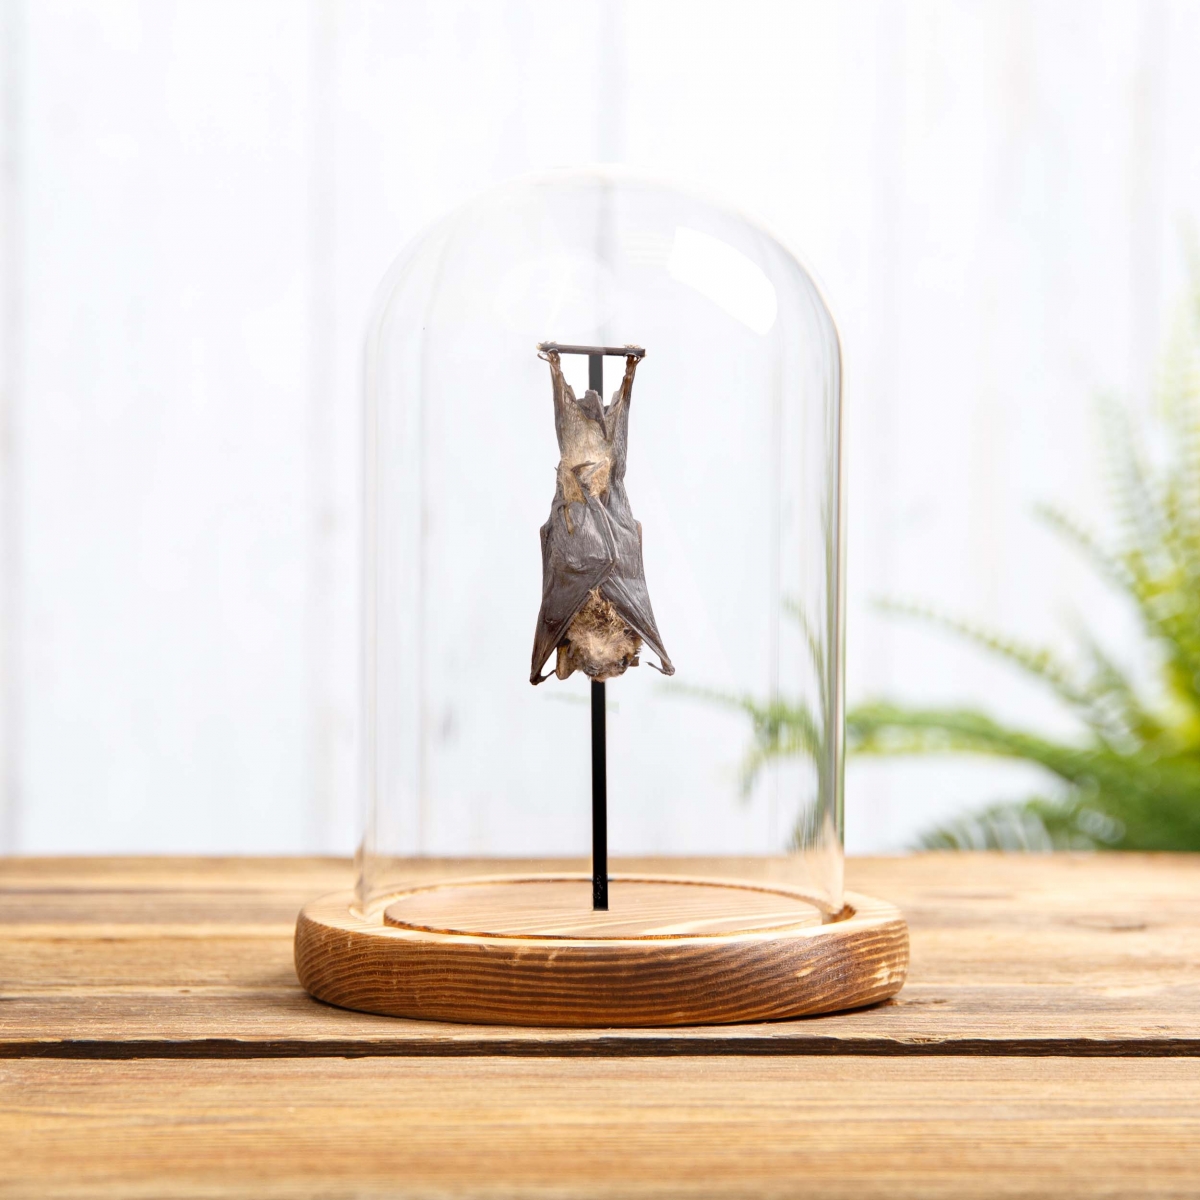 Long-fingered Bat in Glass Dome with Wooden Base (Minipterus medius)